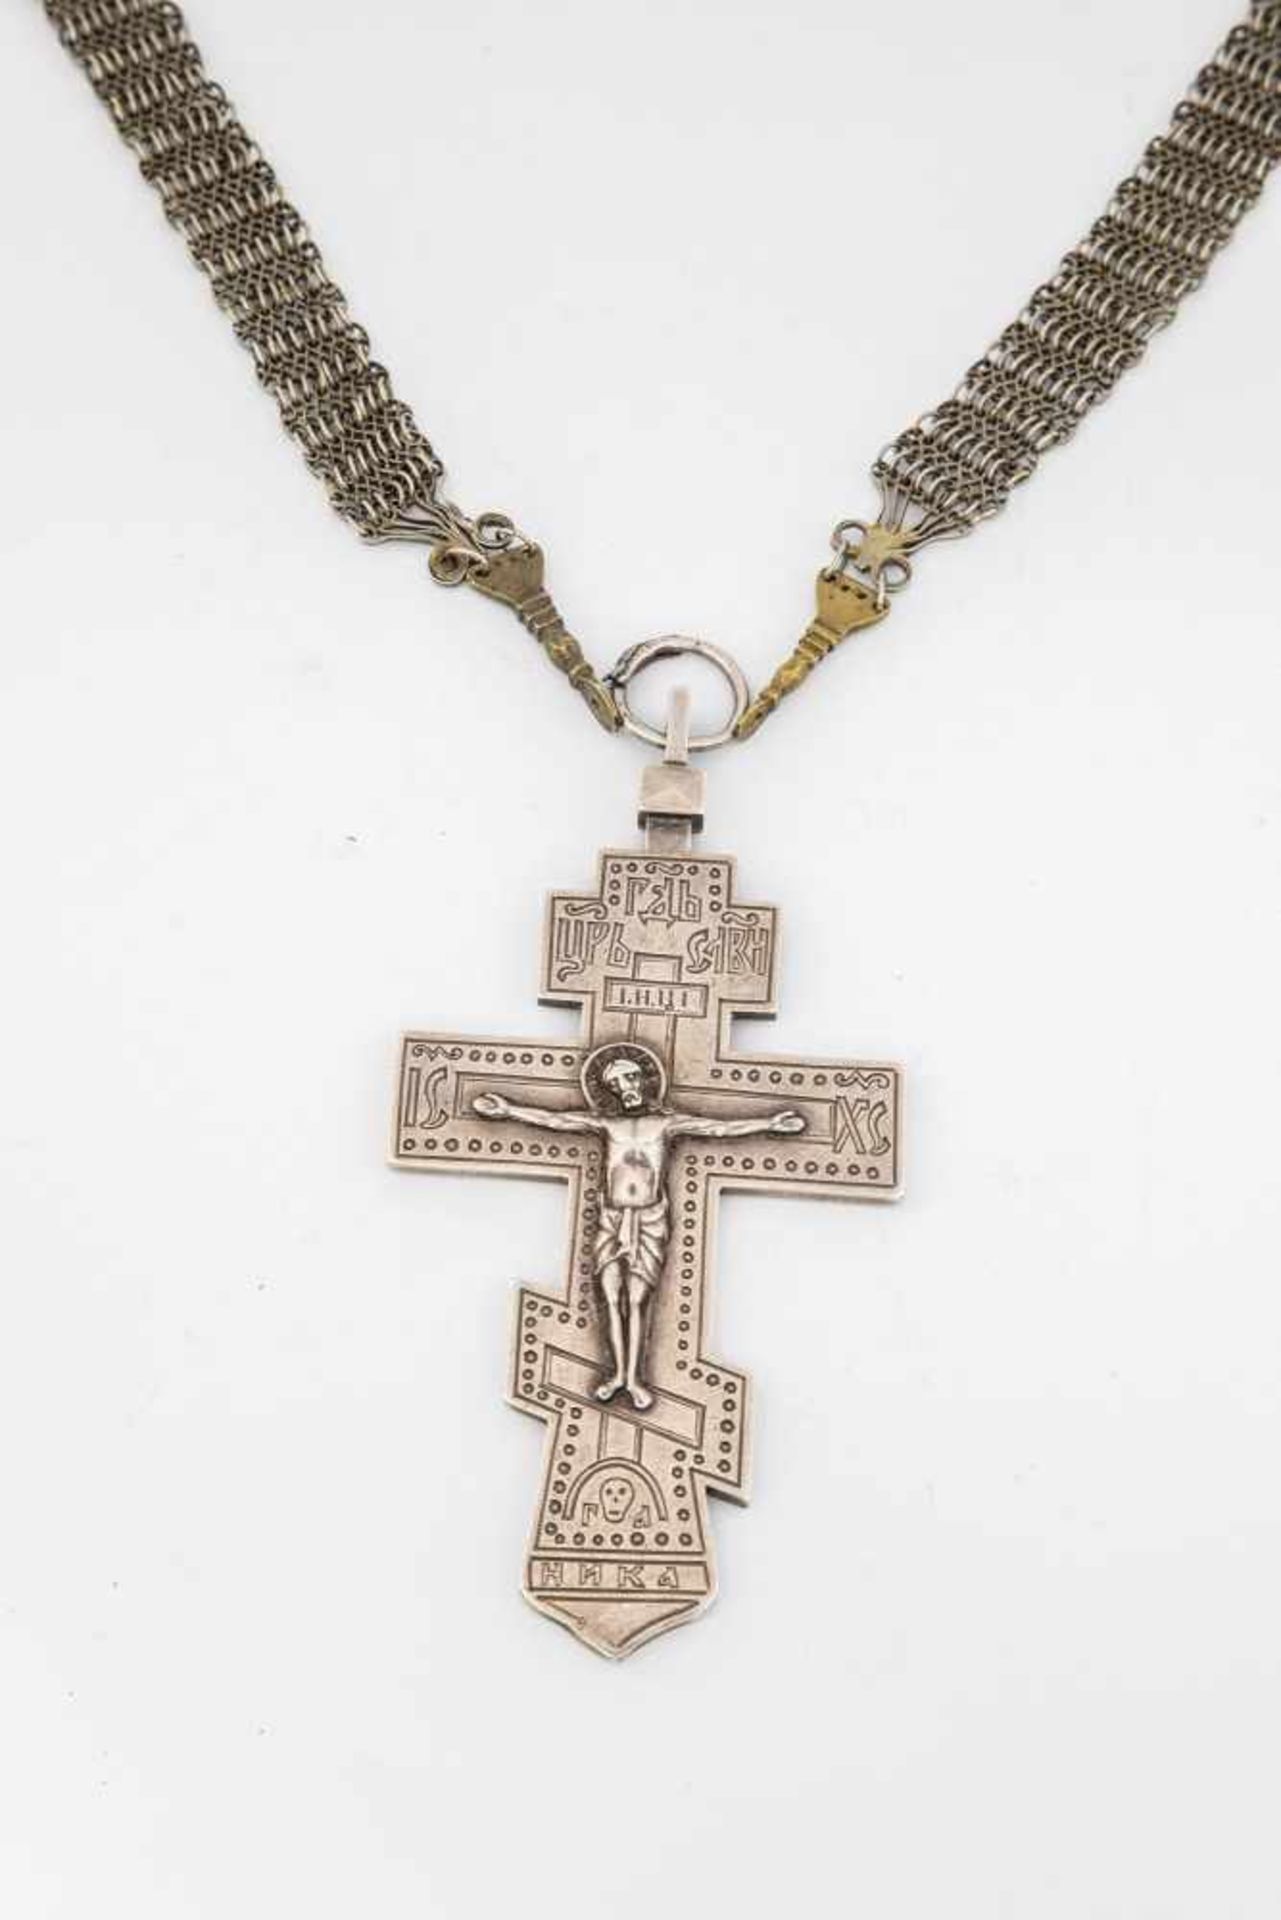 A silver crucifix. Russia, 20th century. Plated chain. Engraved silver cross with appliedchrist